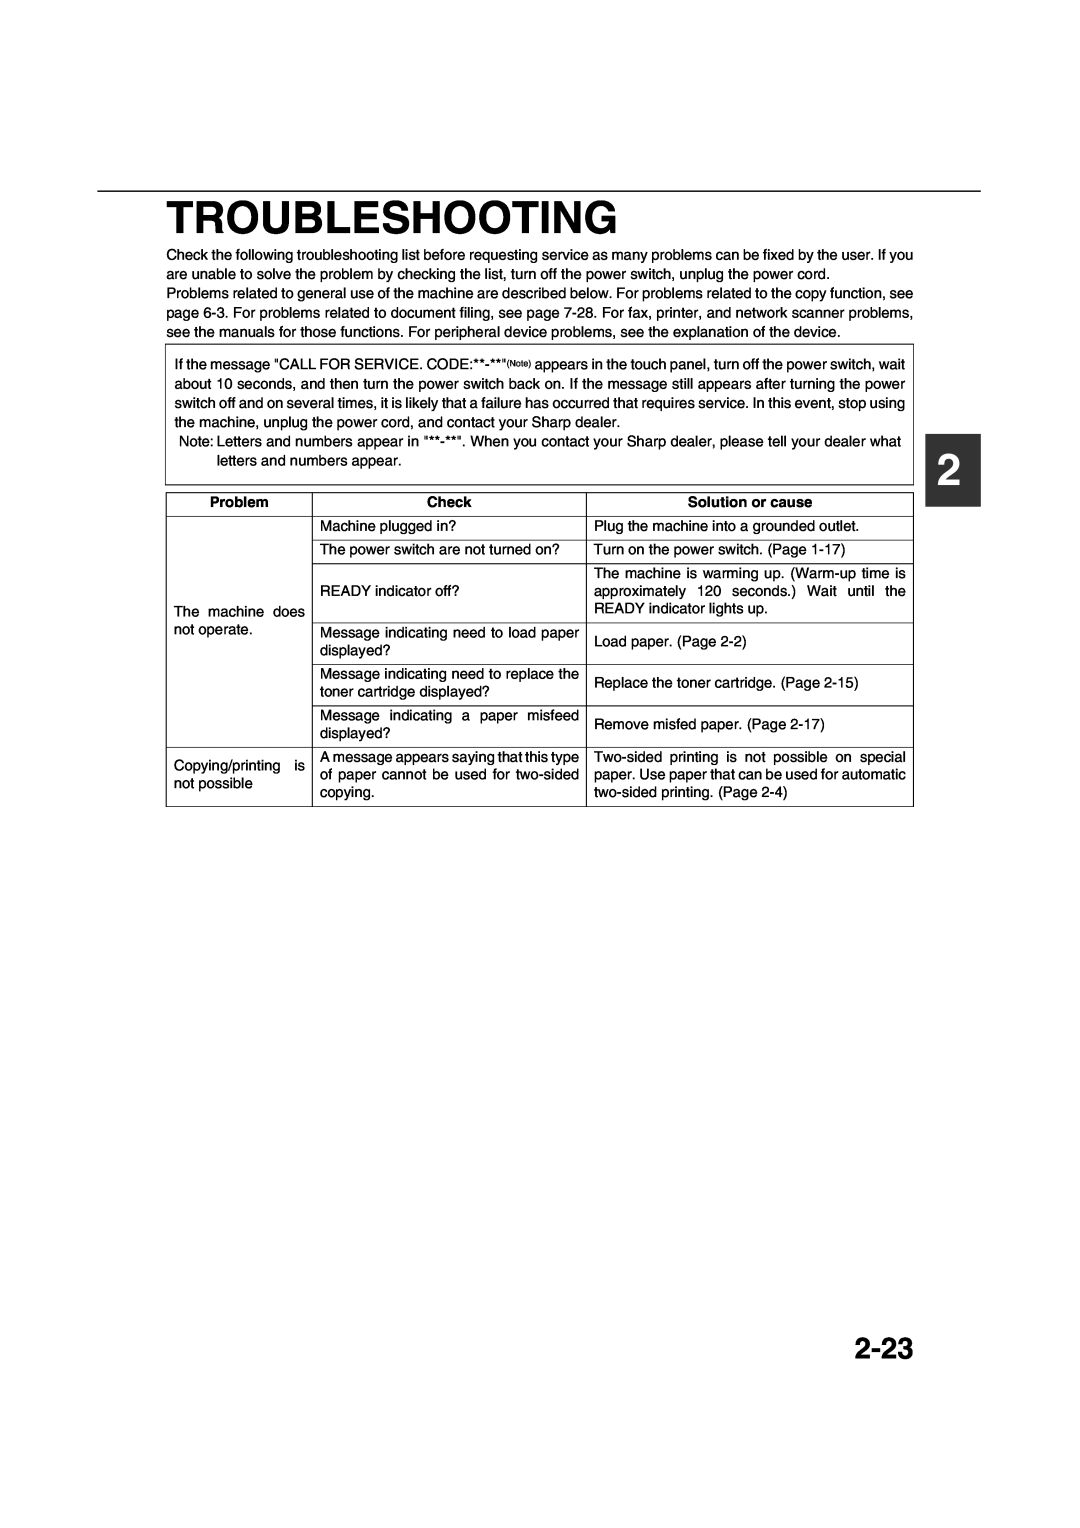 Sharp AR-M451N specifications Troubleshooting, 2-23, Problem, Check, Solution or cause 